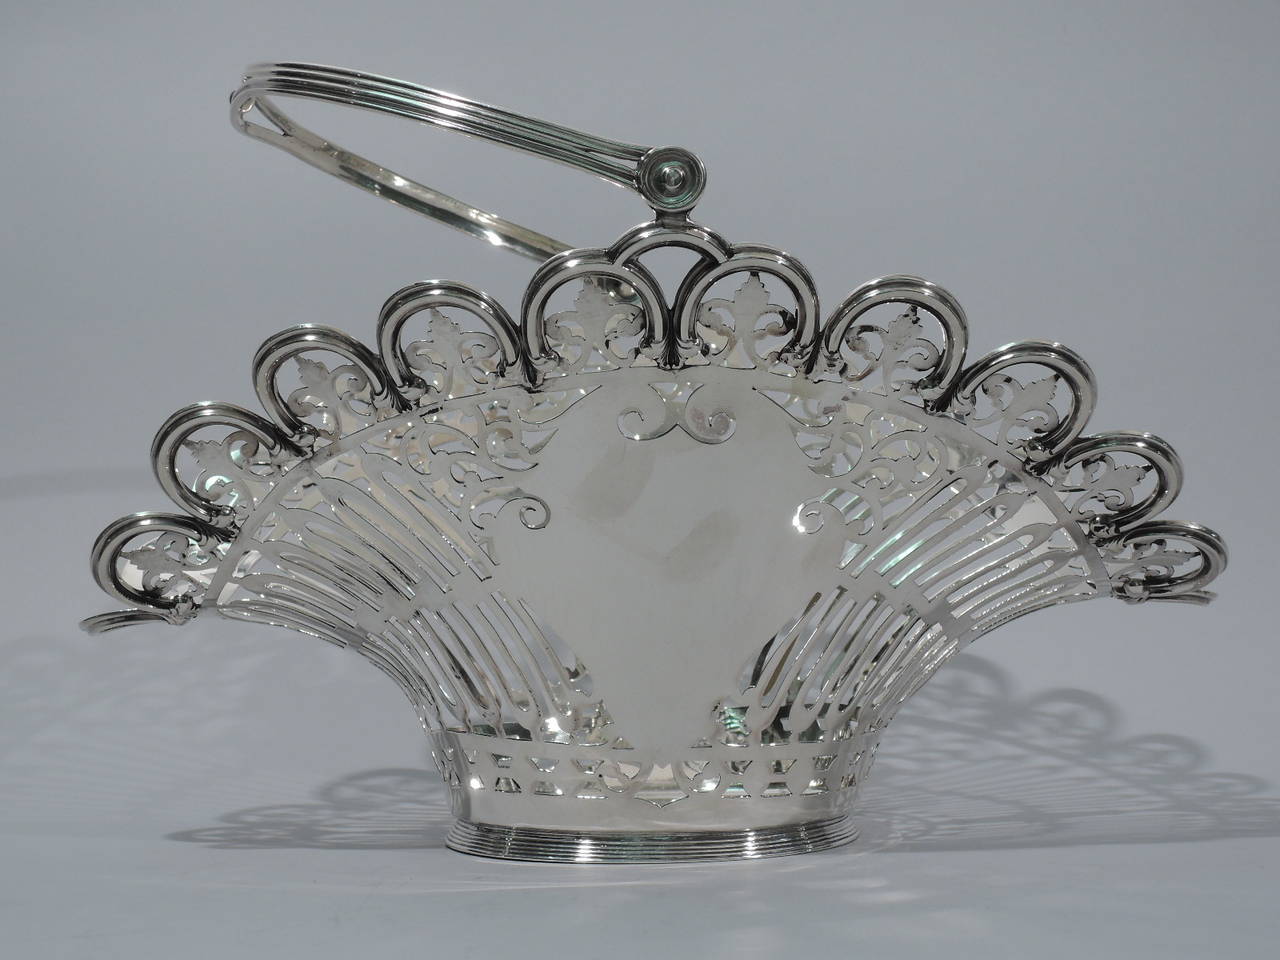 20th Century Beautiful Bailey, Banks and Biddle Epergne with Pierced Baskets, circa 1910